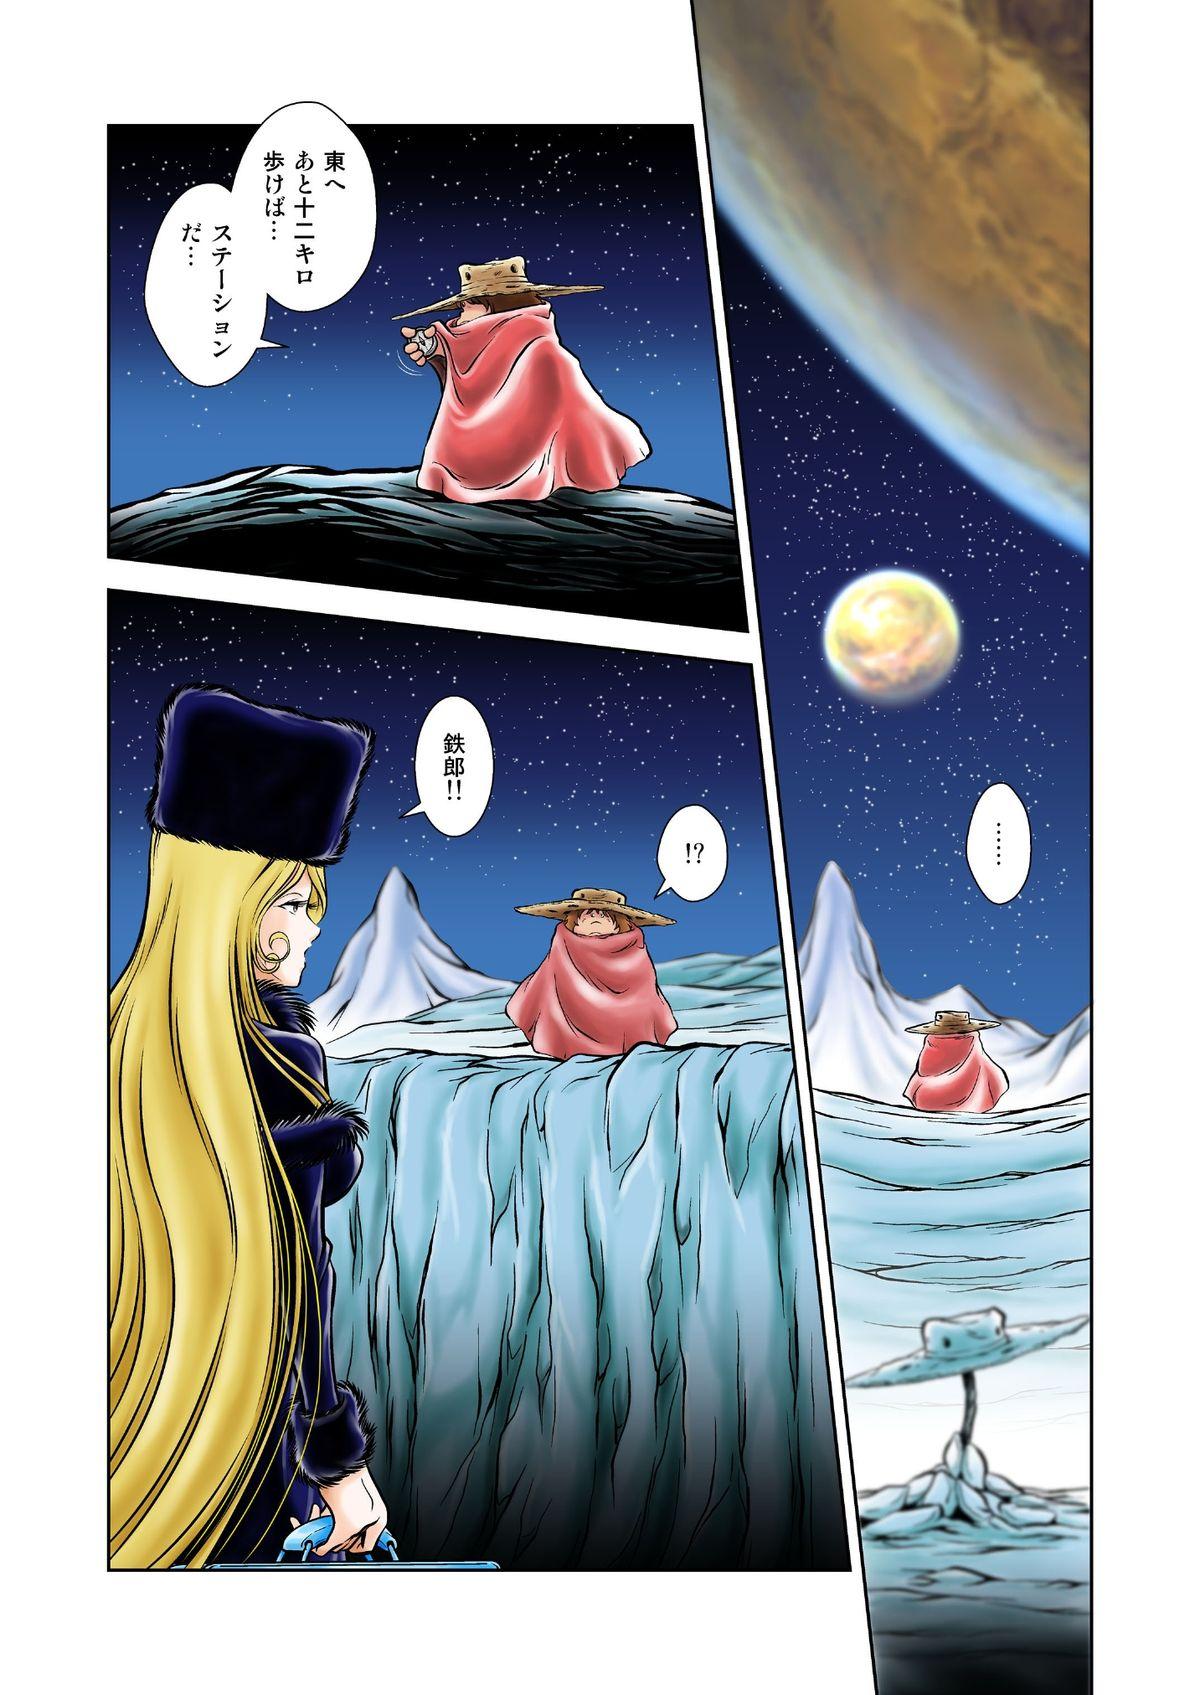 Suck Cock Maetel Story 15 - Galaxy express 999 Doggie Style Porn - Page 4